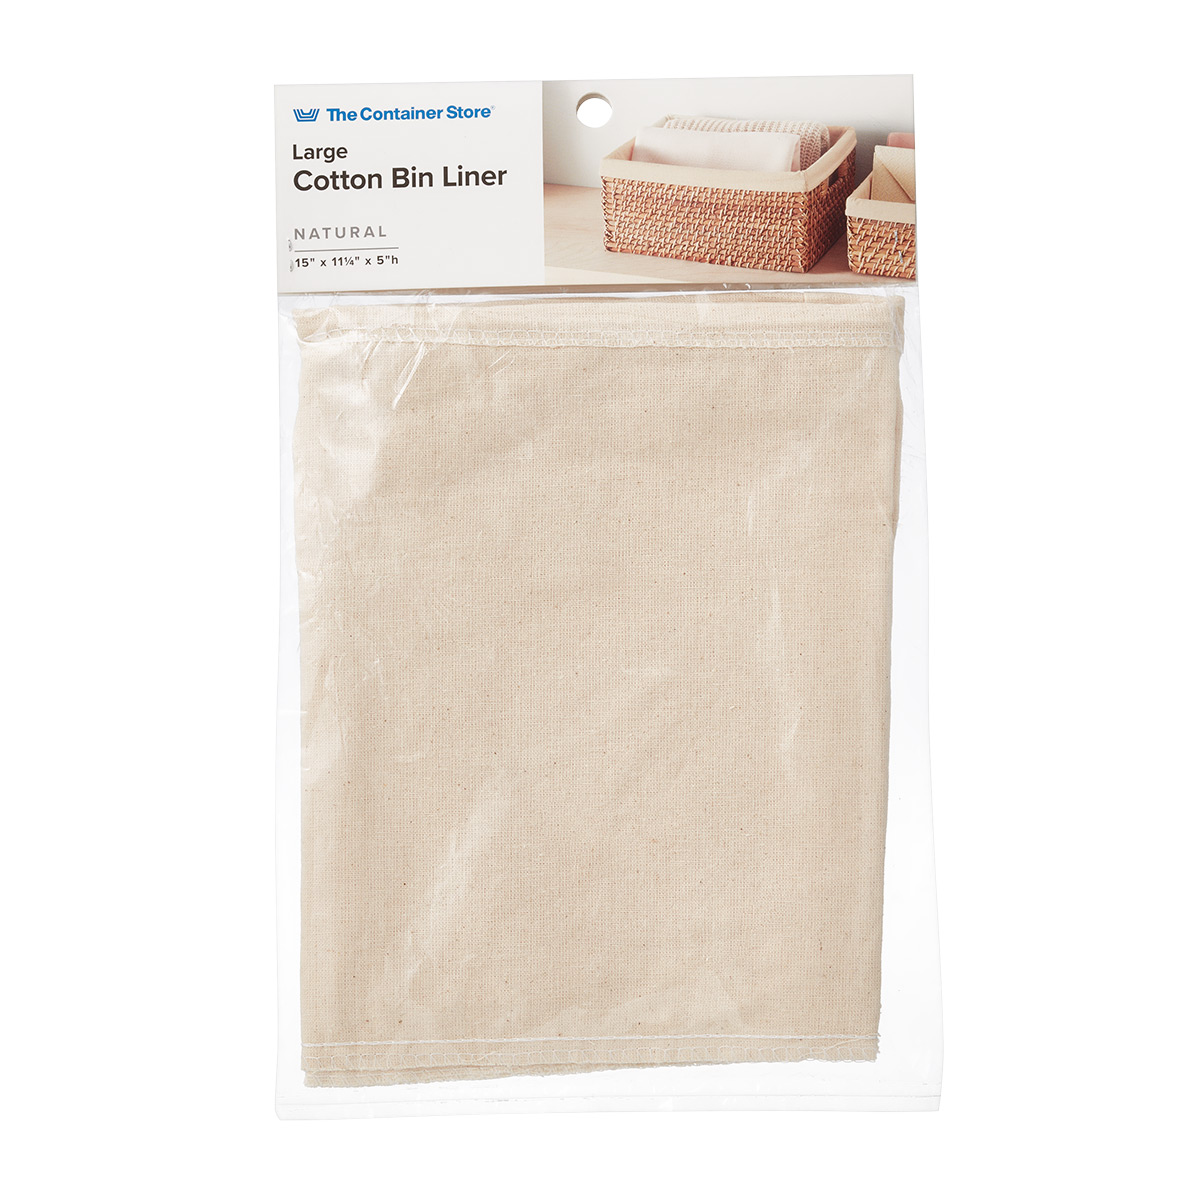 https://www.containerstore.com/catalogimages/482123/10090446-tcs-large-cotton-bin-liner.jpg